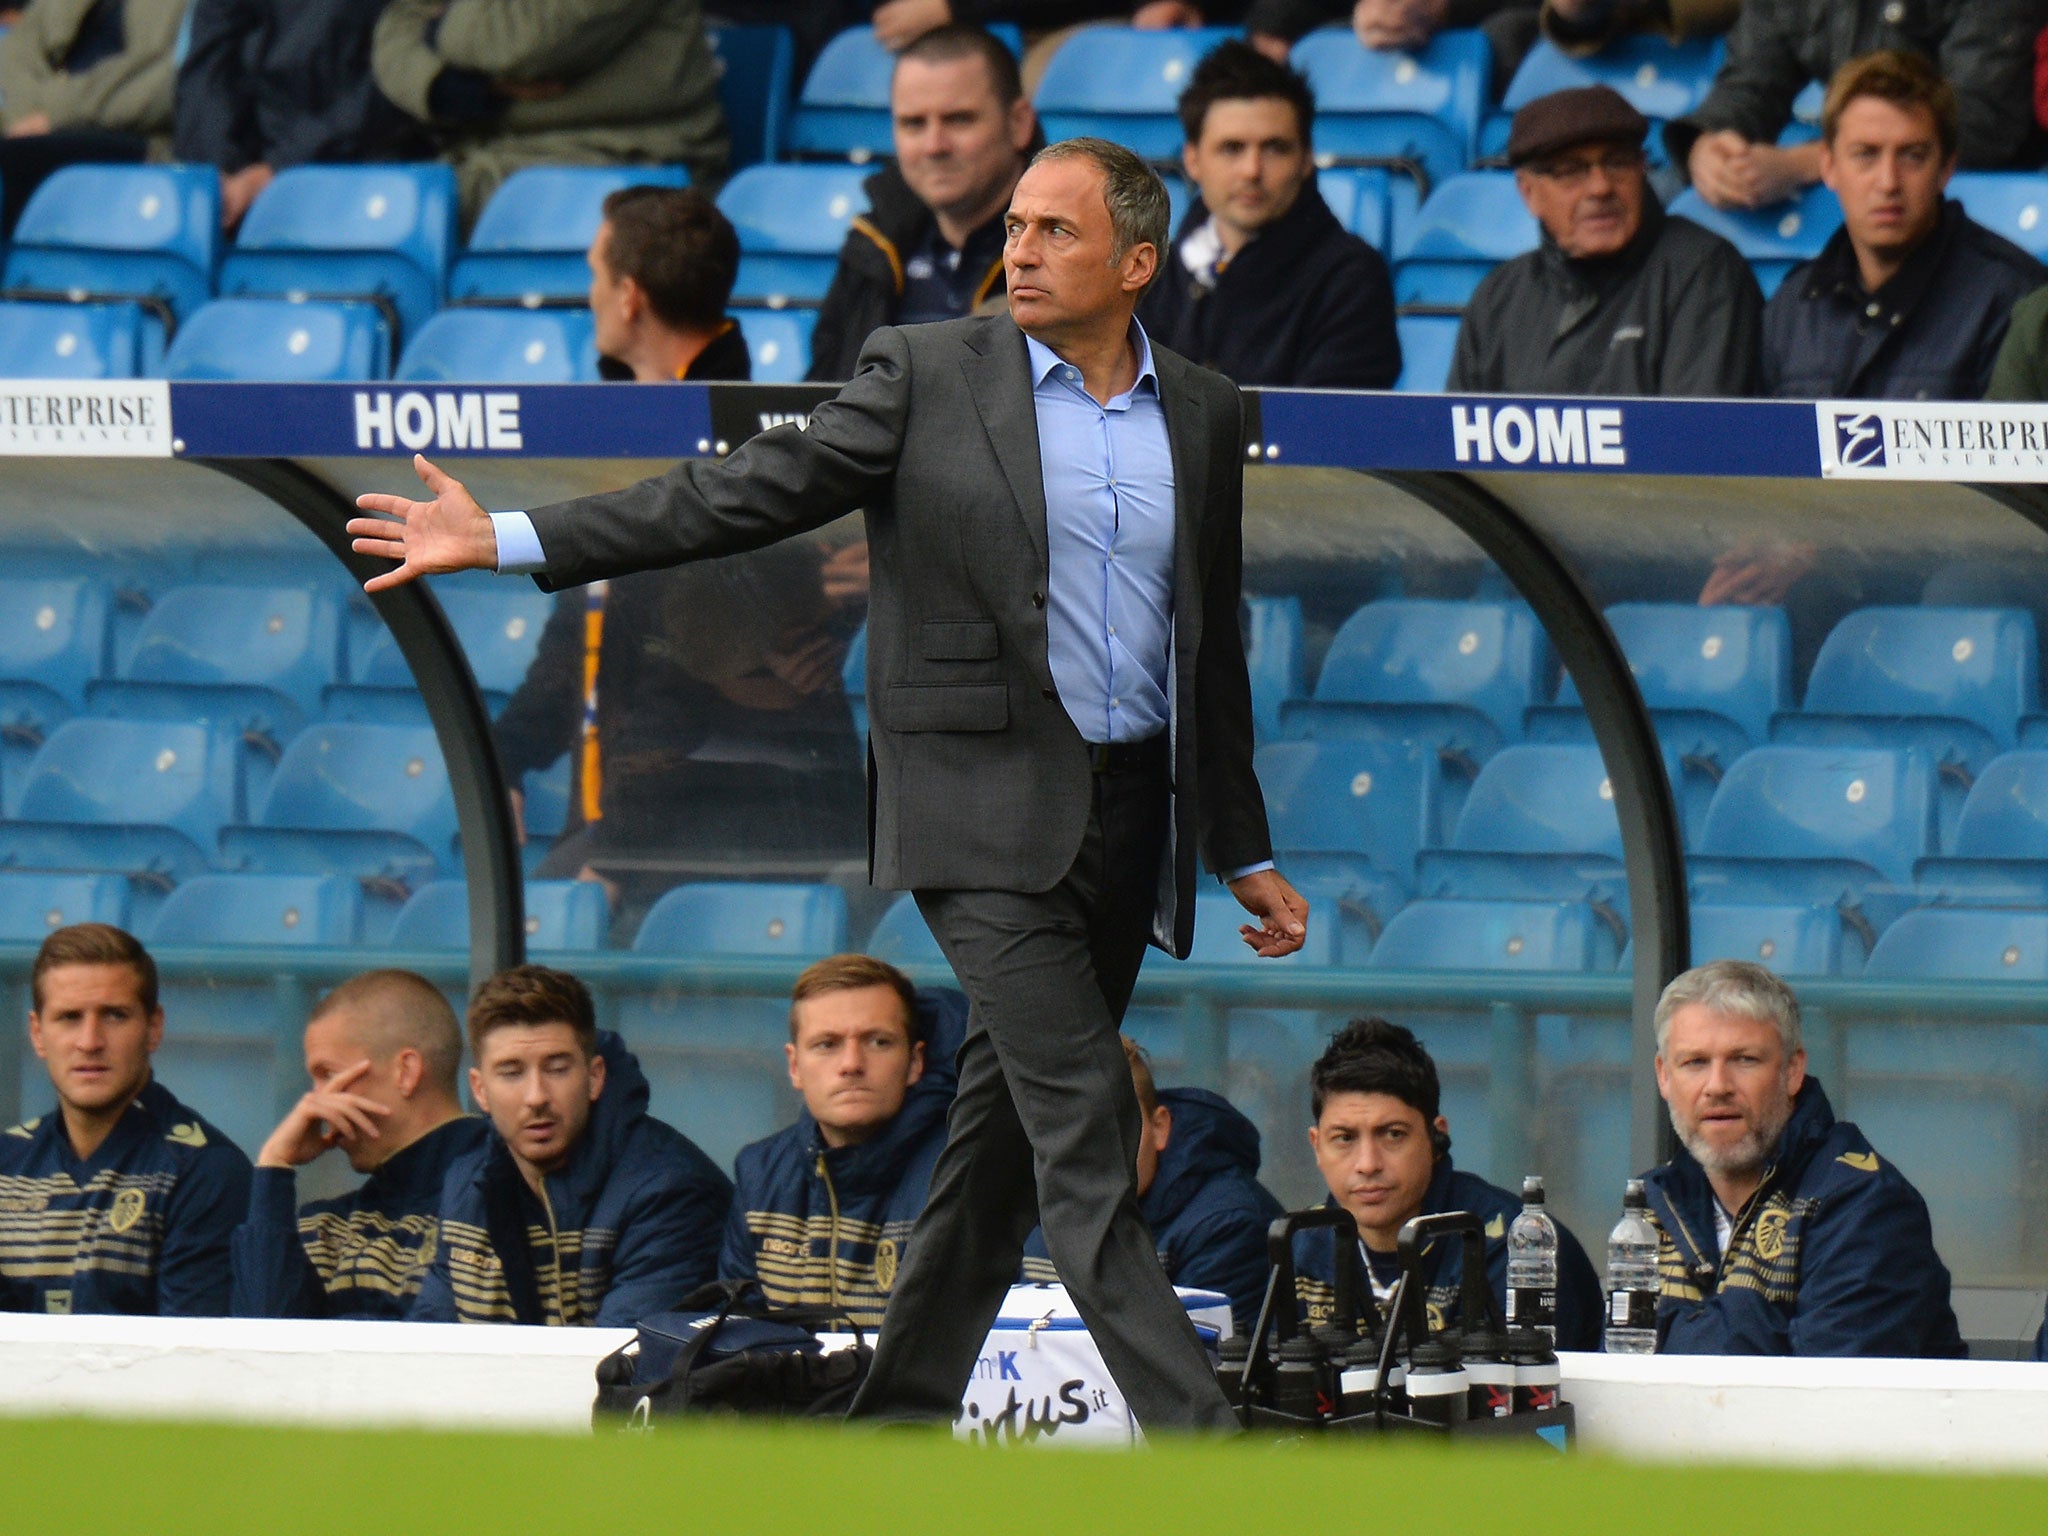 Leeds manager Darko Milanic gestures from the dug-out